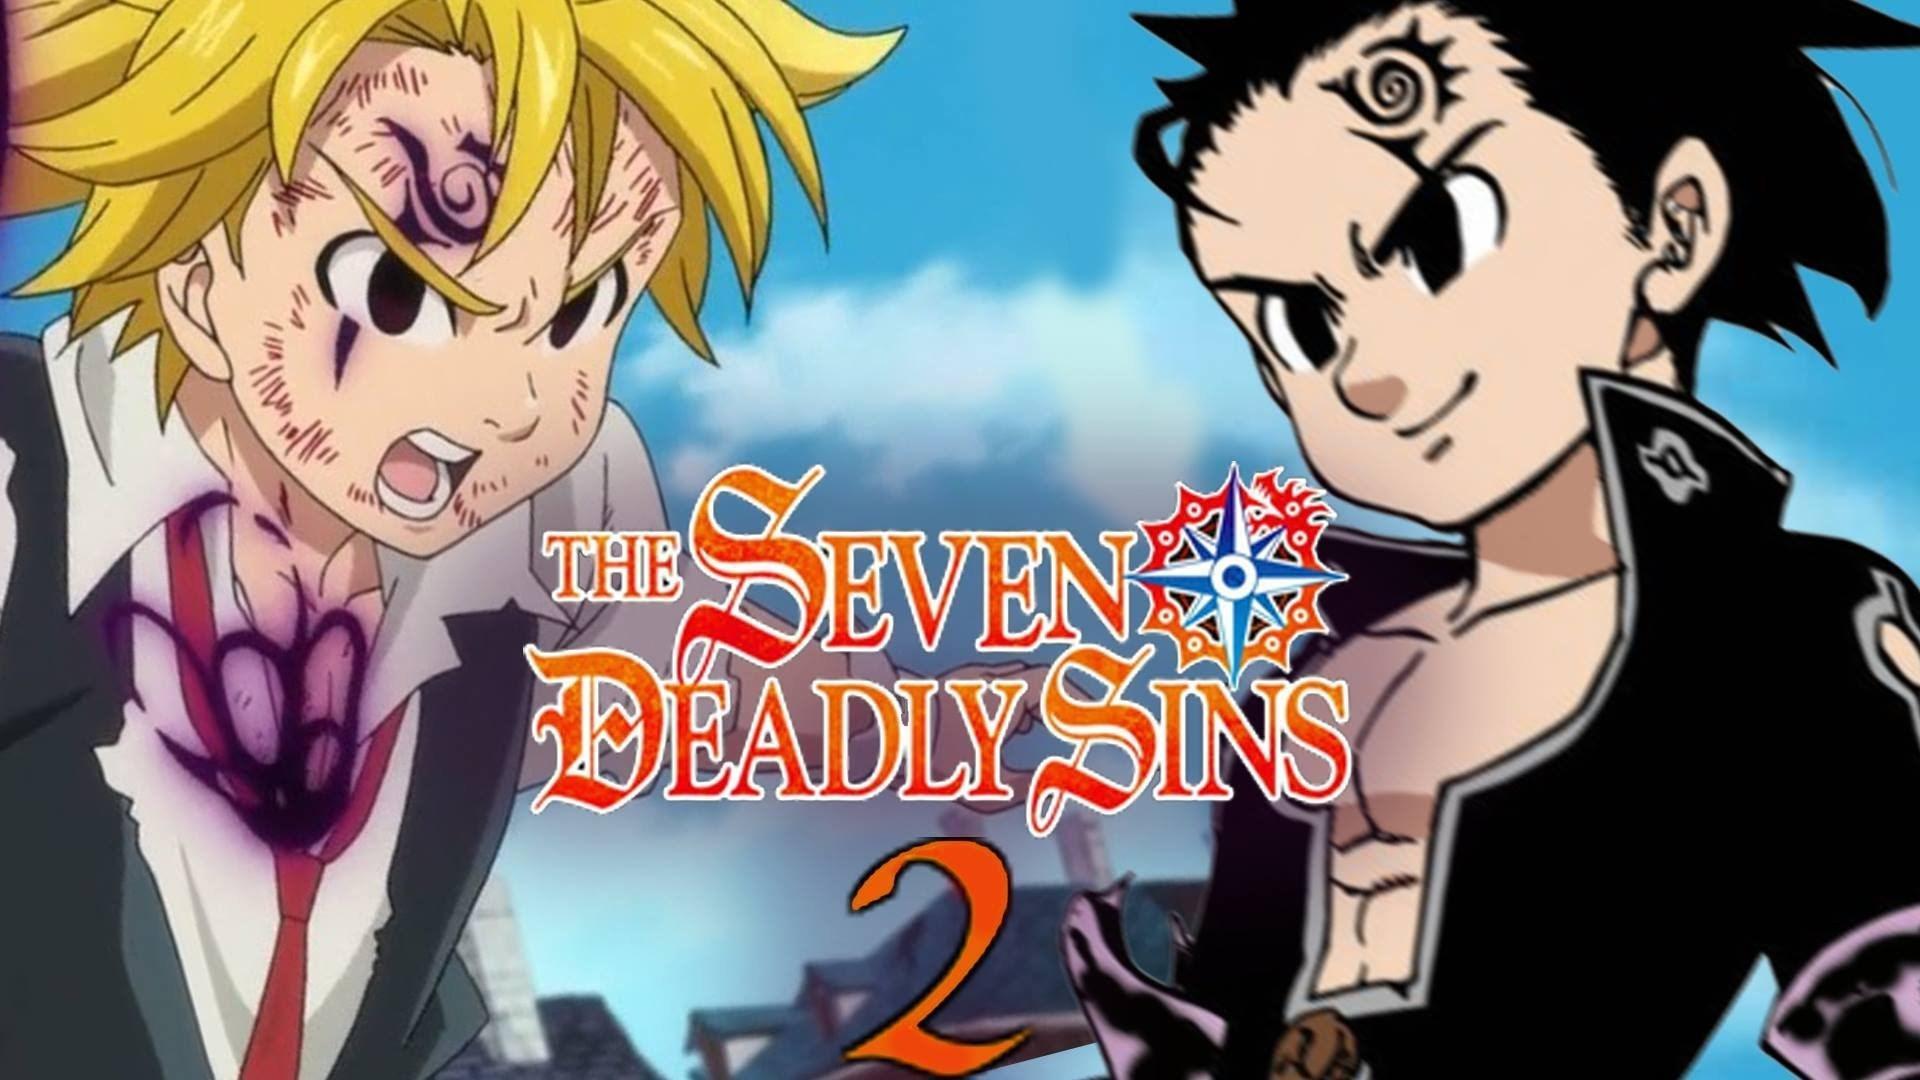 The Seven Deadly Sins Revival Of The Commandments Desktop Wallpaper Hd, The Seven Deadly Sins Revival Of The Commandments, Anime